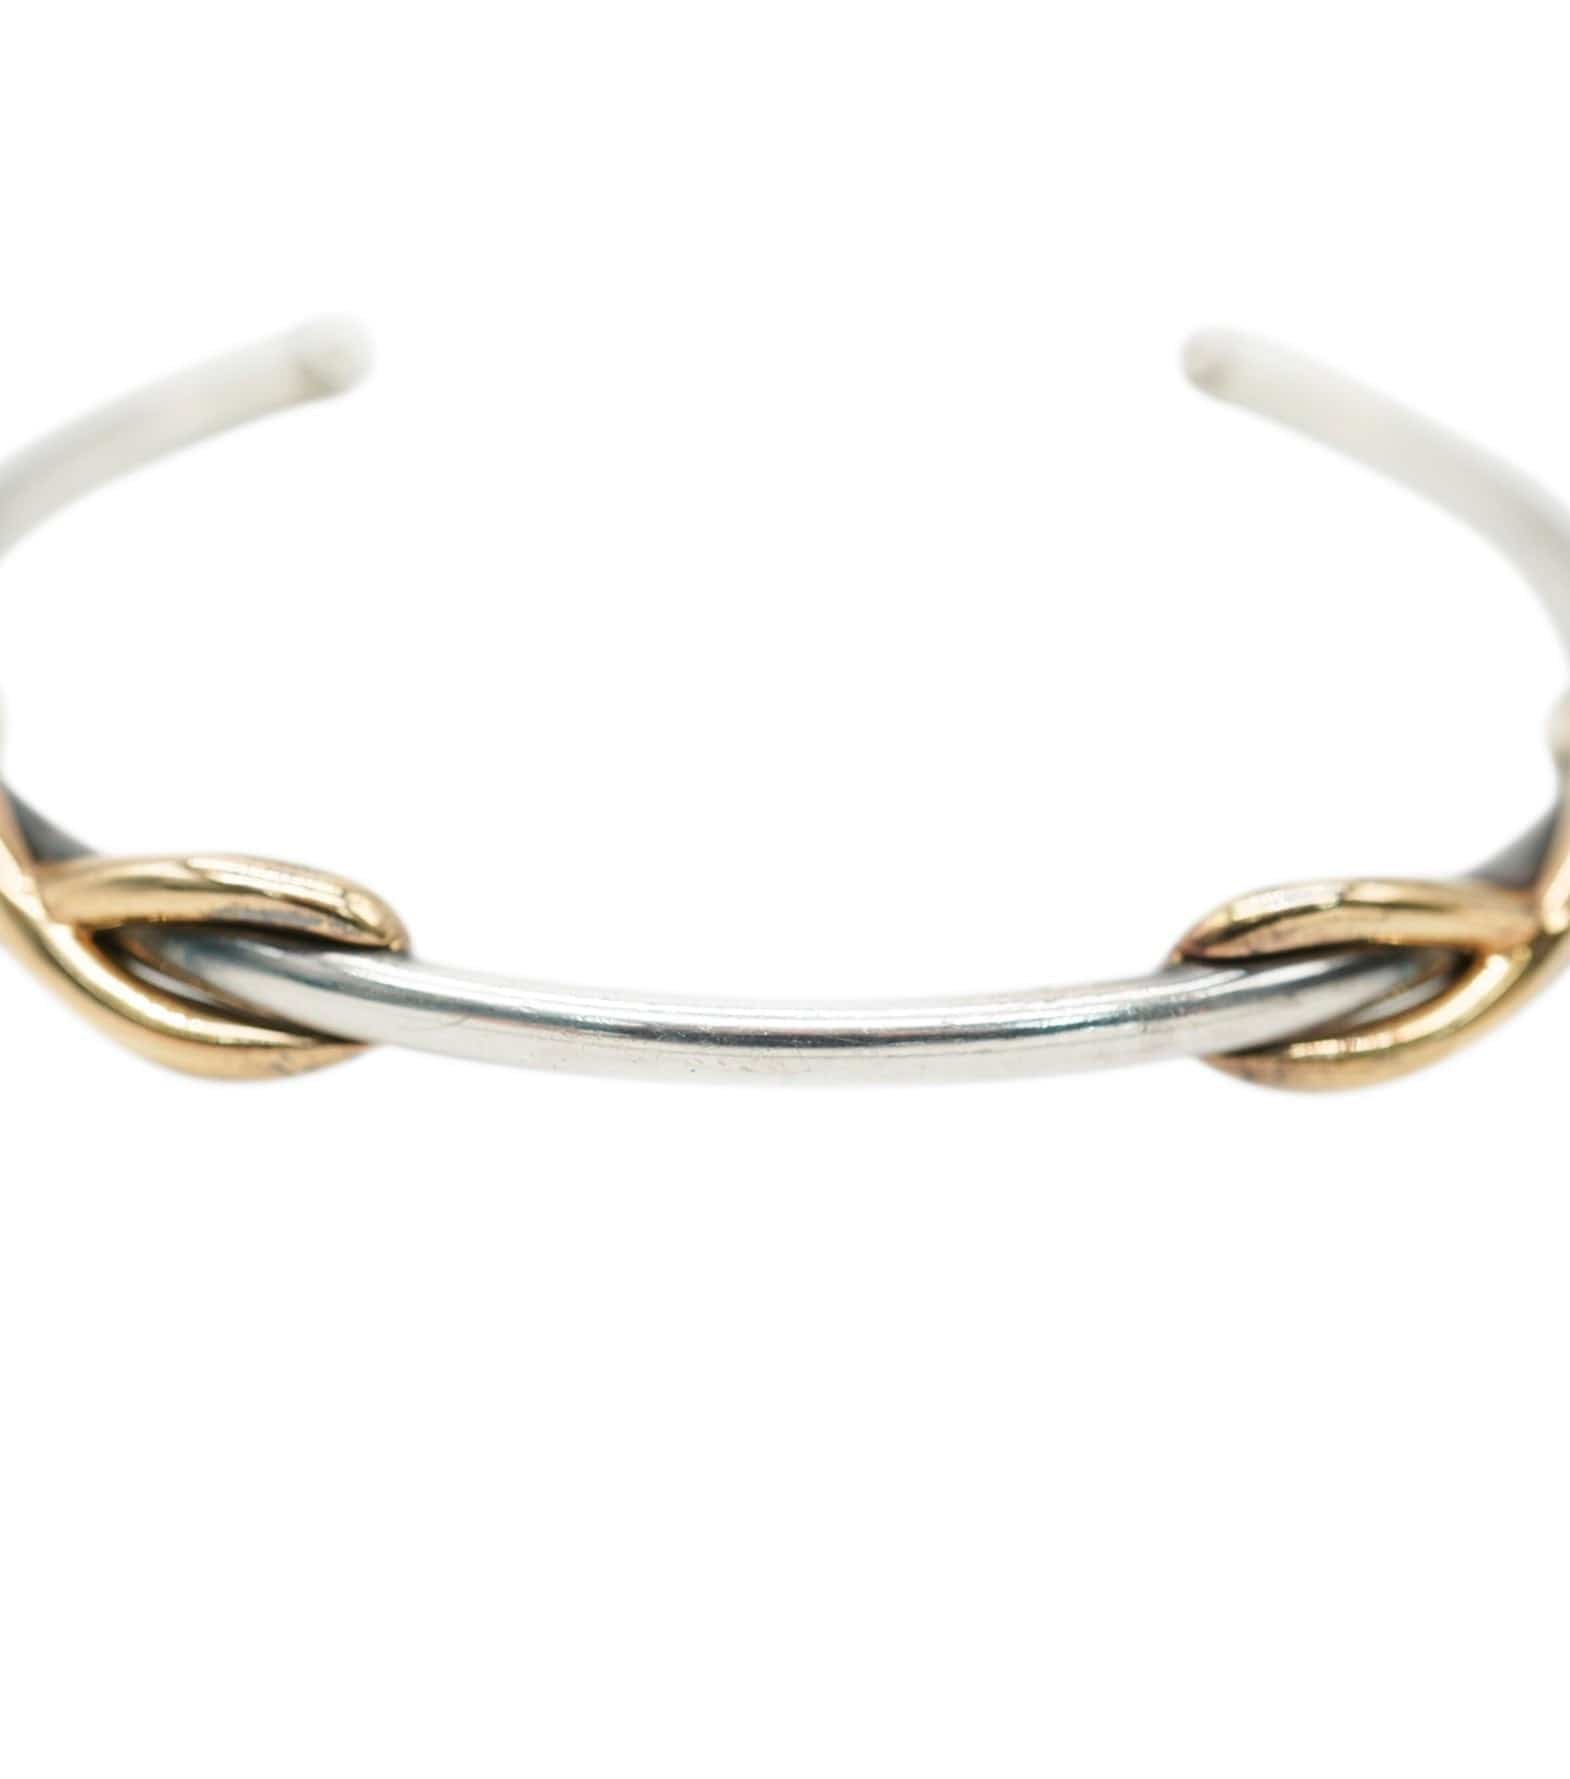 Tiffany & Co. Tiffany & Co. Yellow Gold & Sterling Silver Double Infinity Cuff Bracelet ABC0774